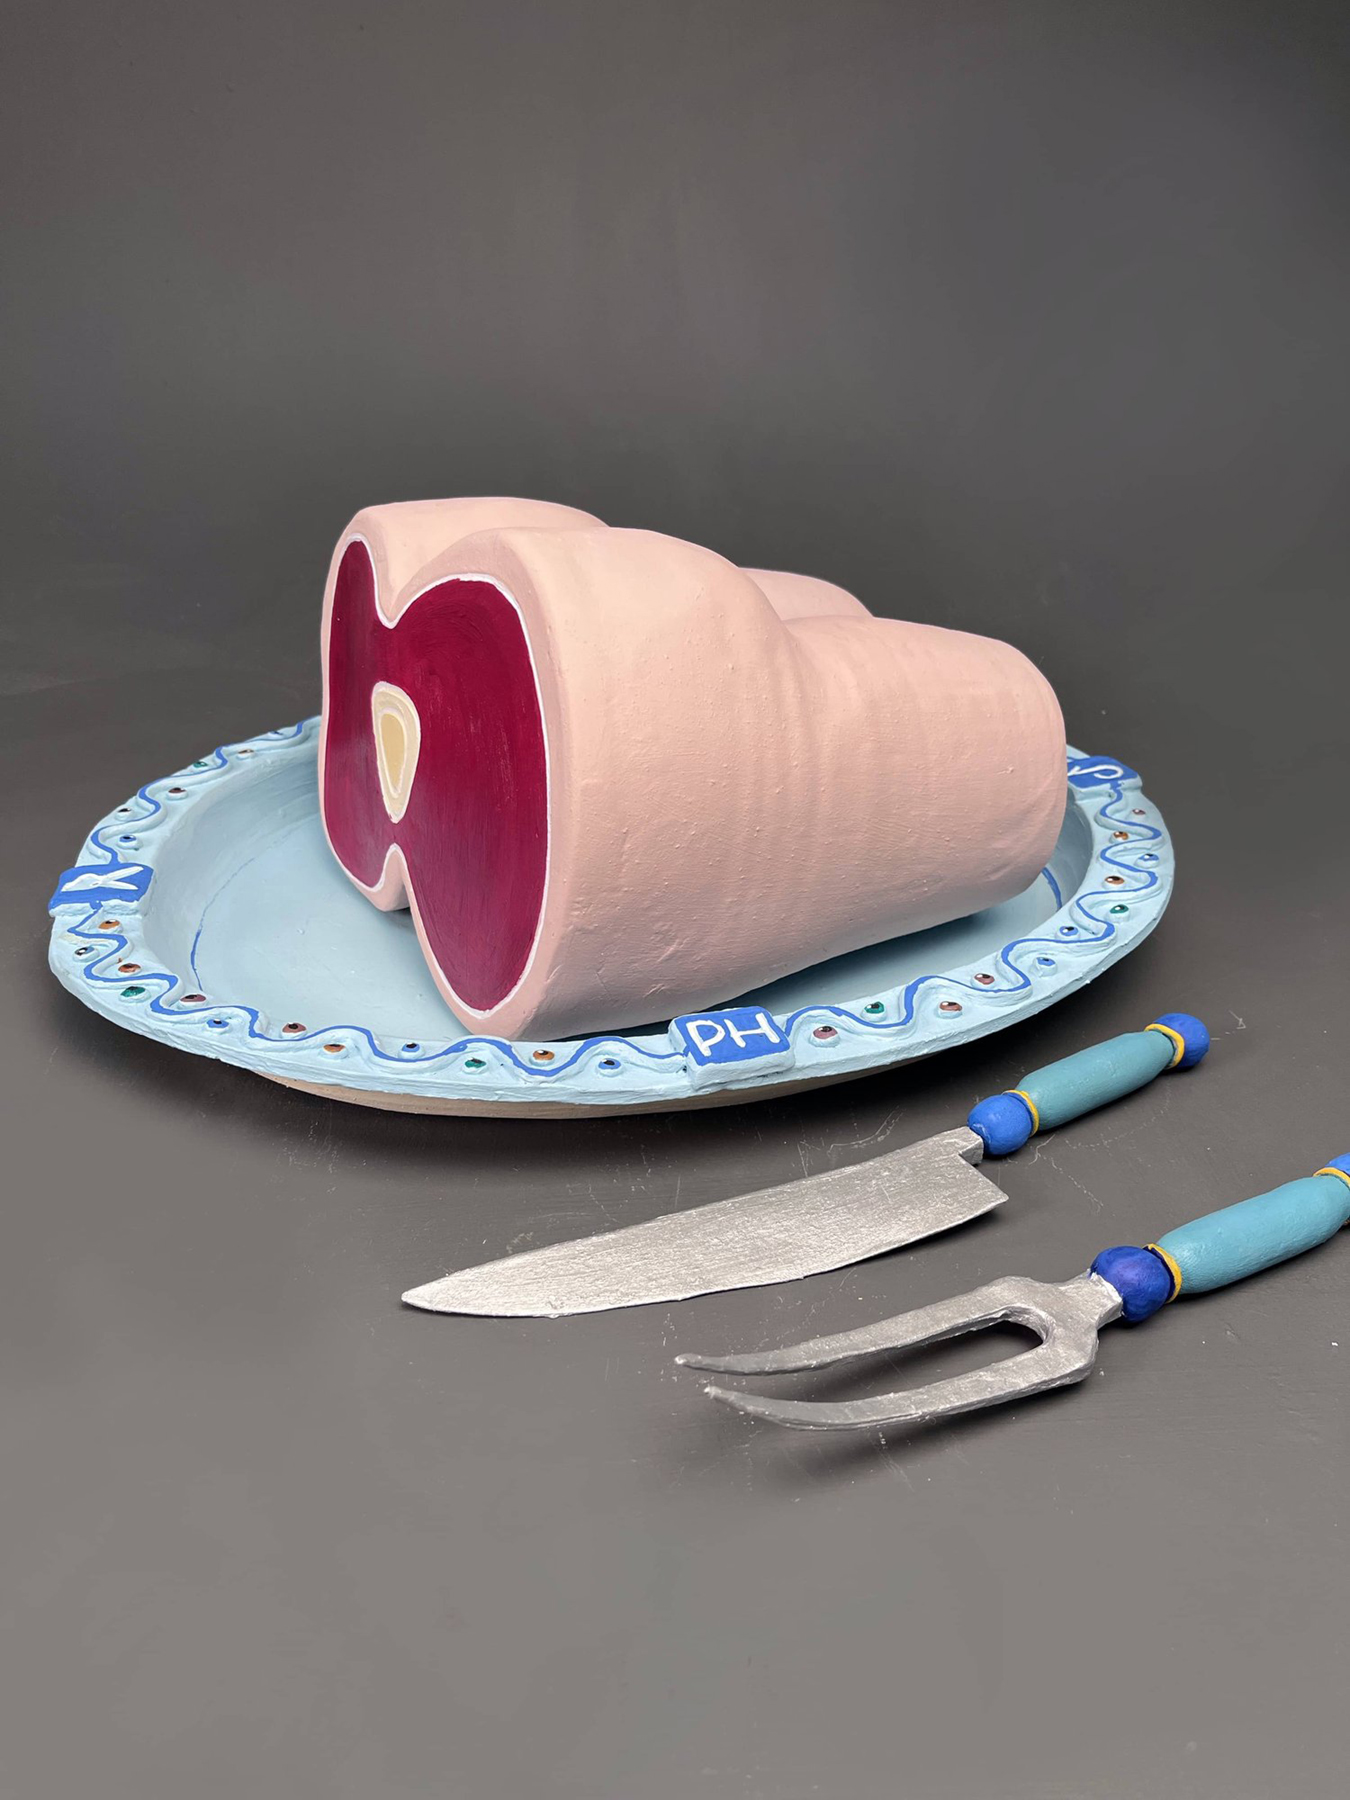 Ceramic sculpture of a cross-section of the female body on a blue platter next to a fork and knife, courtesy of the artist